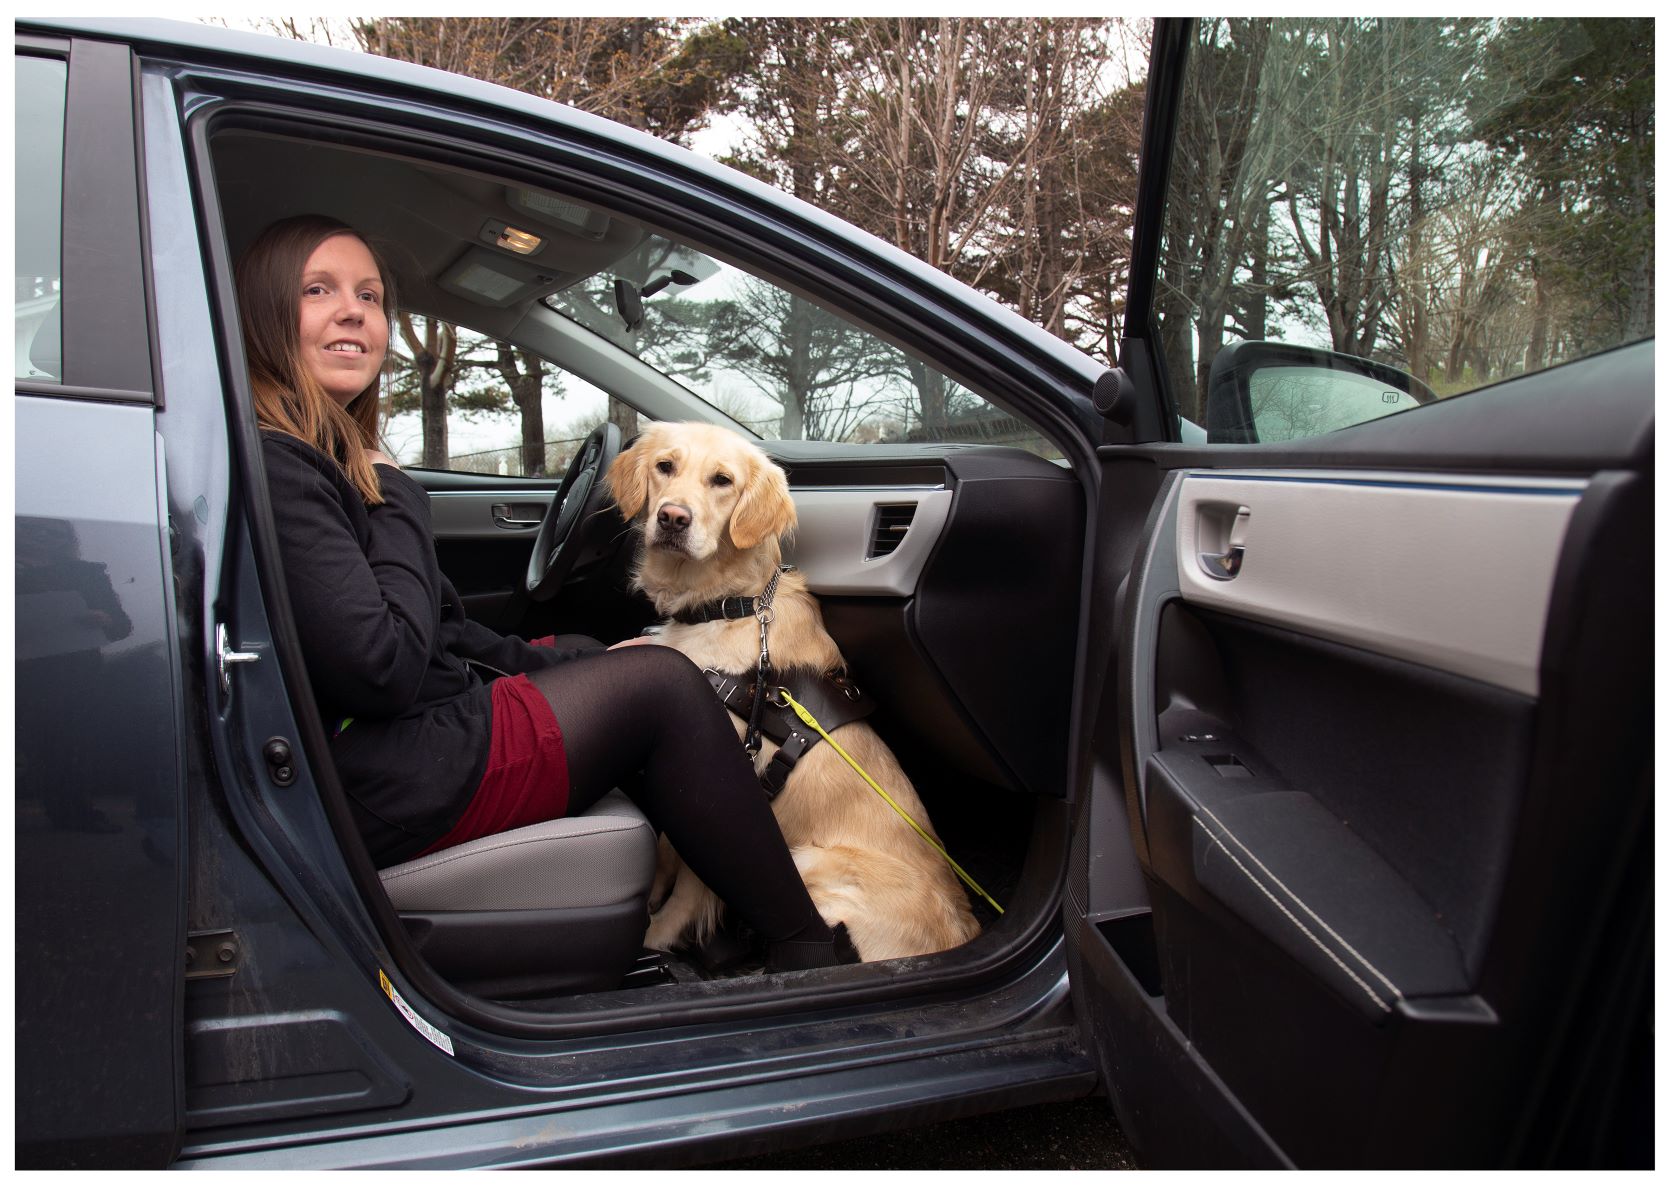 A woman is sitting in the front passenger seat of a car with the door open; her guide dog, a golden retriever, is sitting at her feet in the passenger footwell.